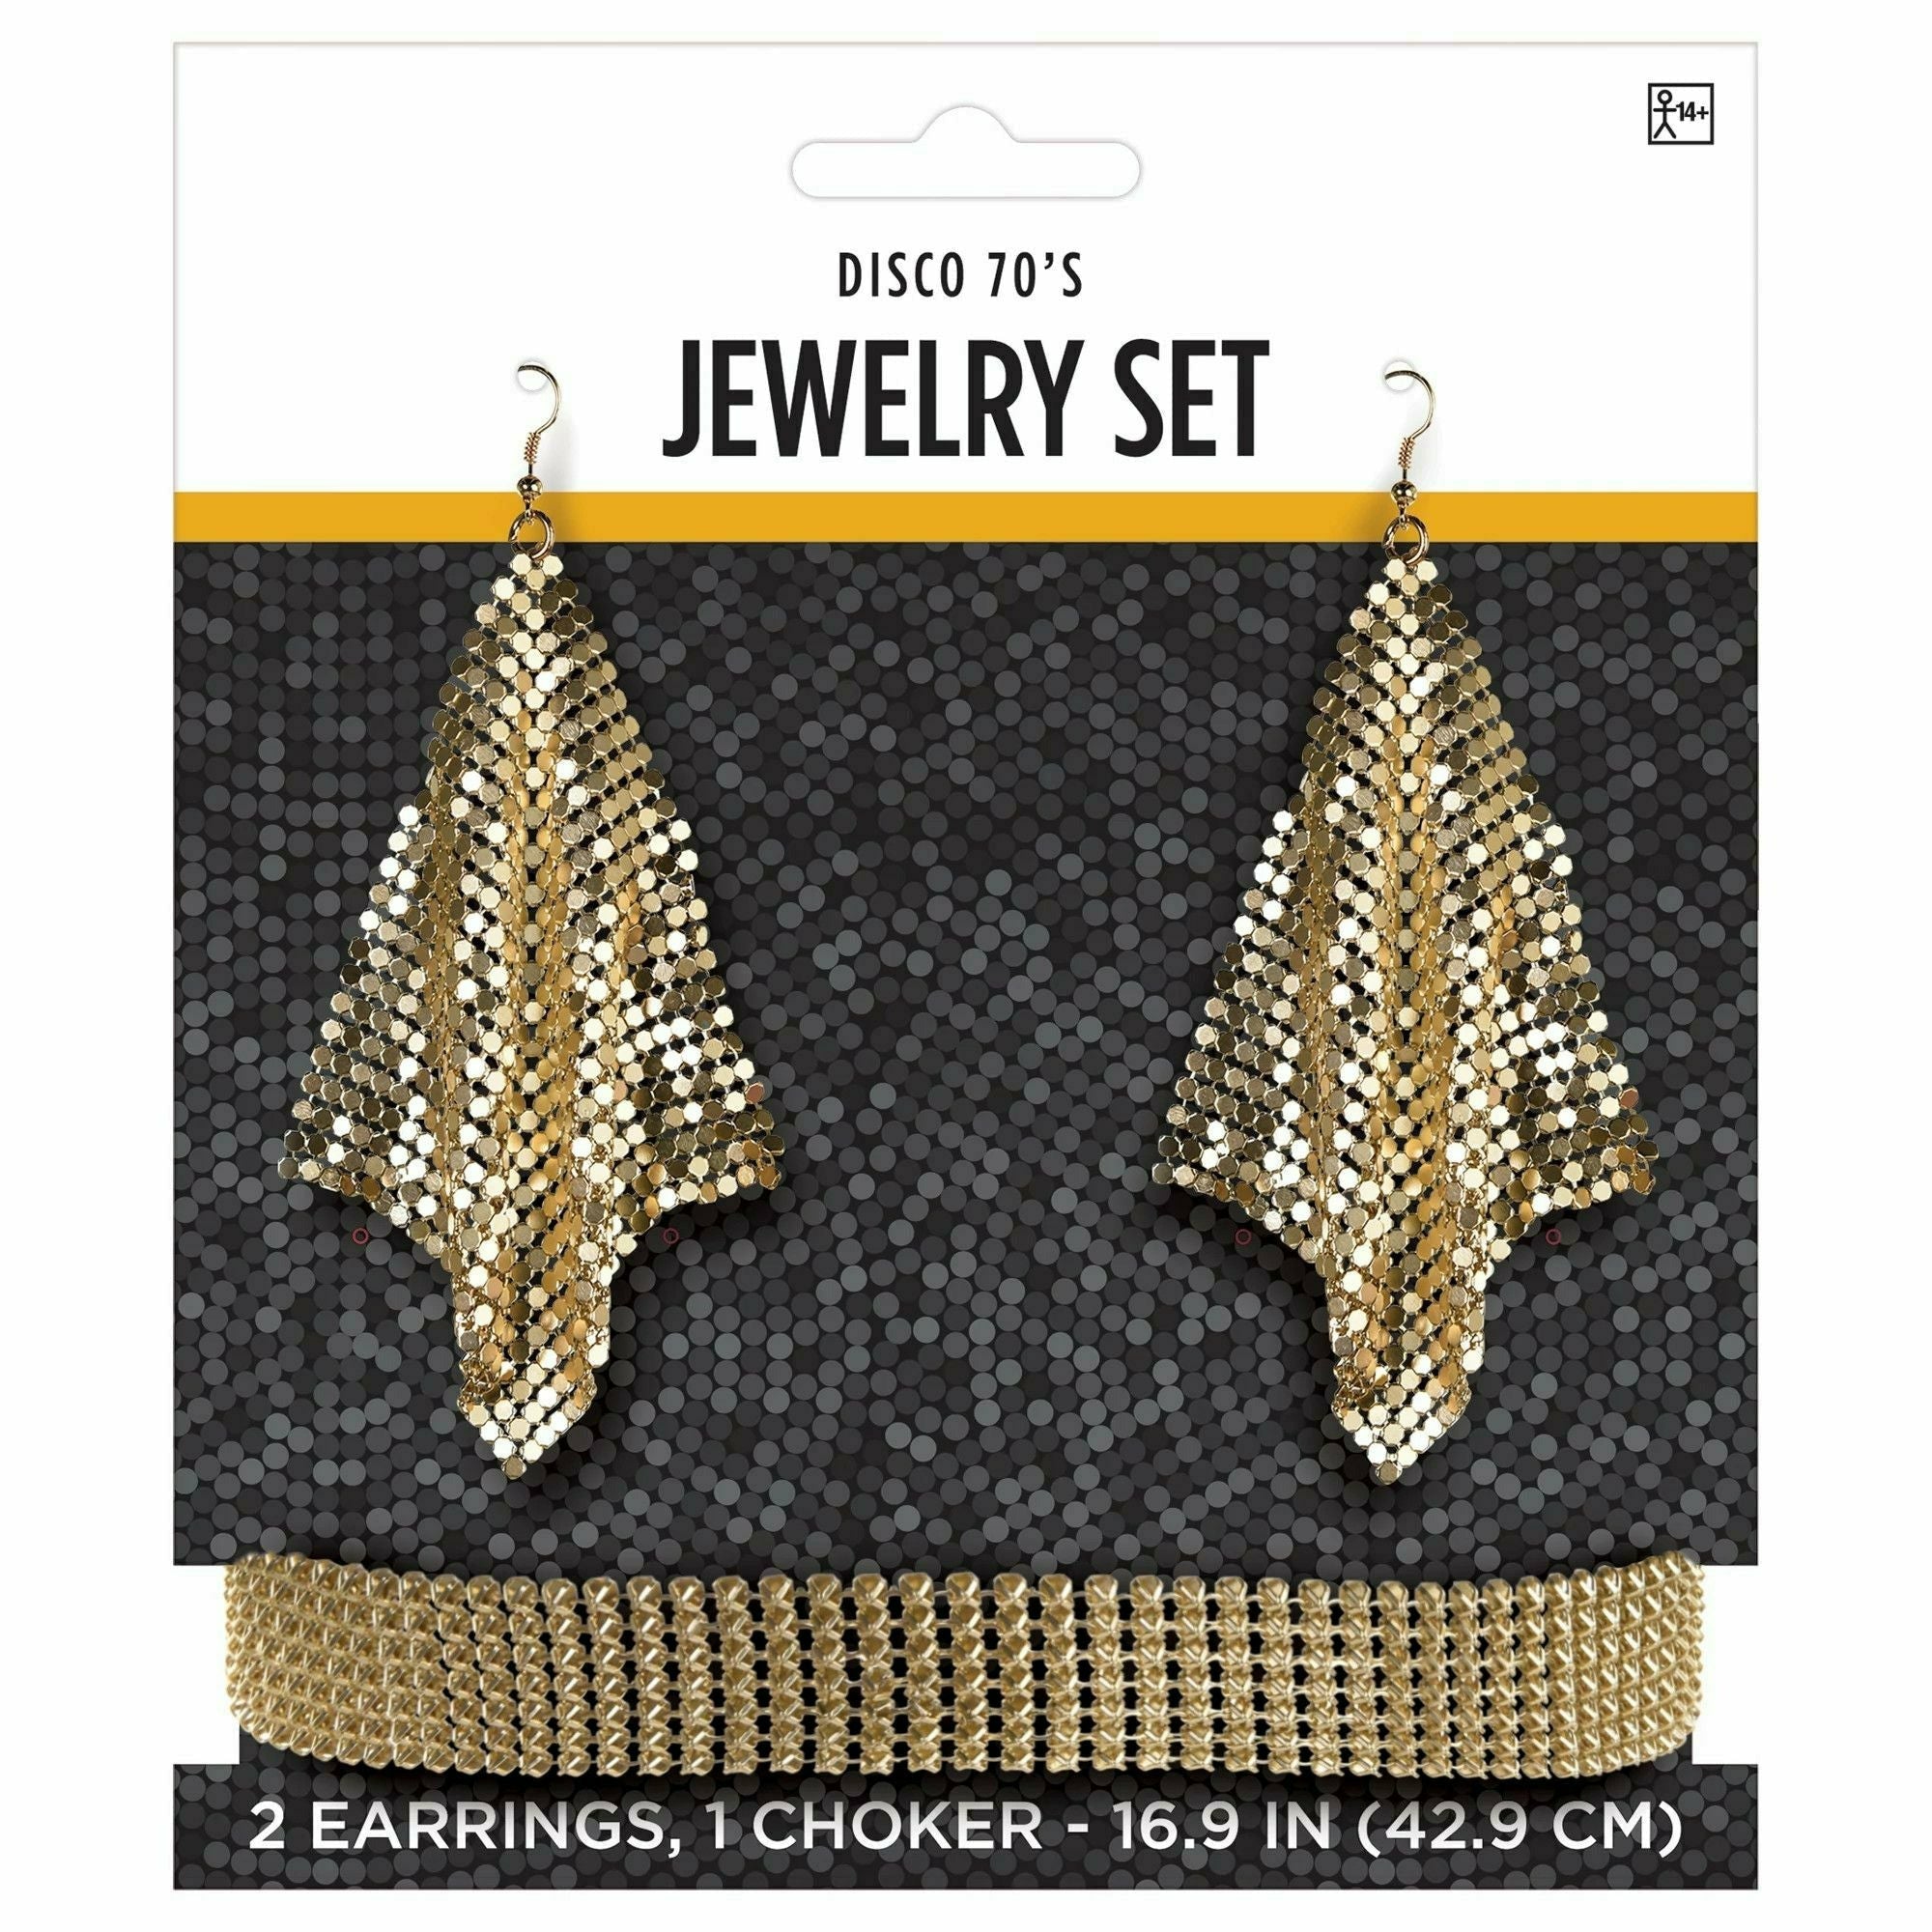 Amscan COSTUMES: ACCESSORIES 70's Jewelry Set